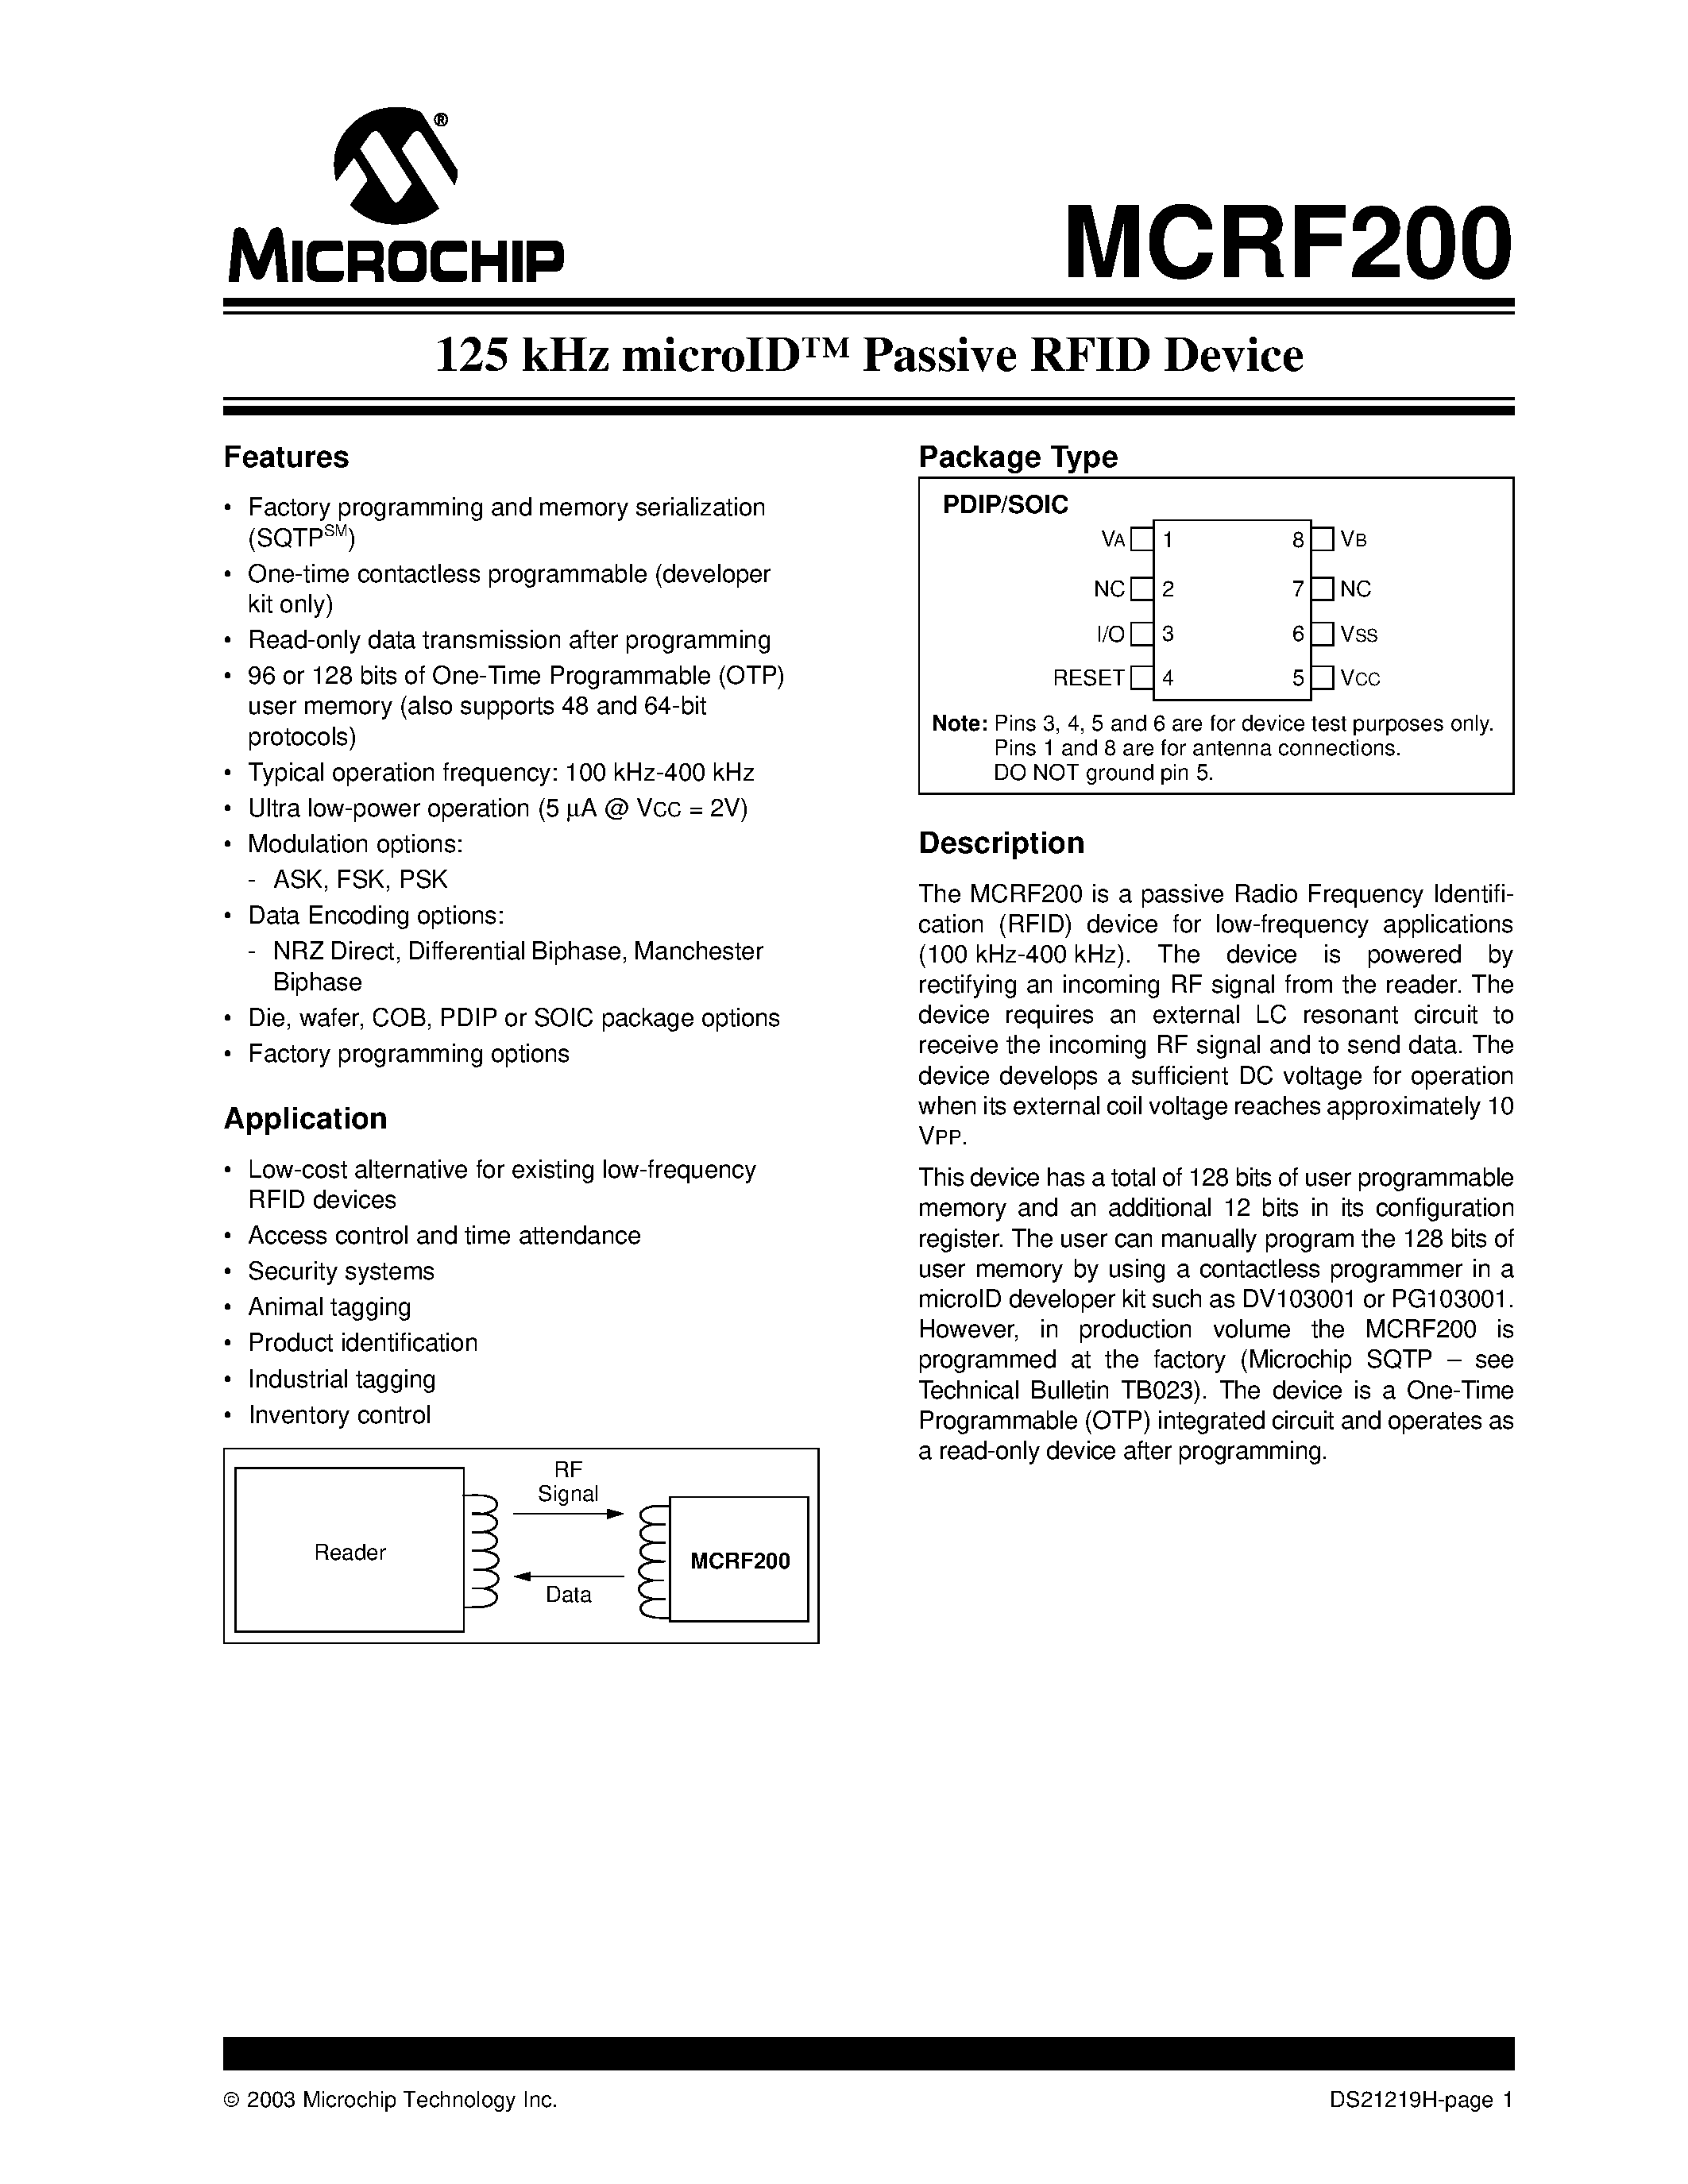 Datasheet MCRF200 - 125 kHz microID Passive RFID Device page 1